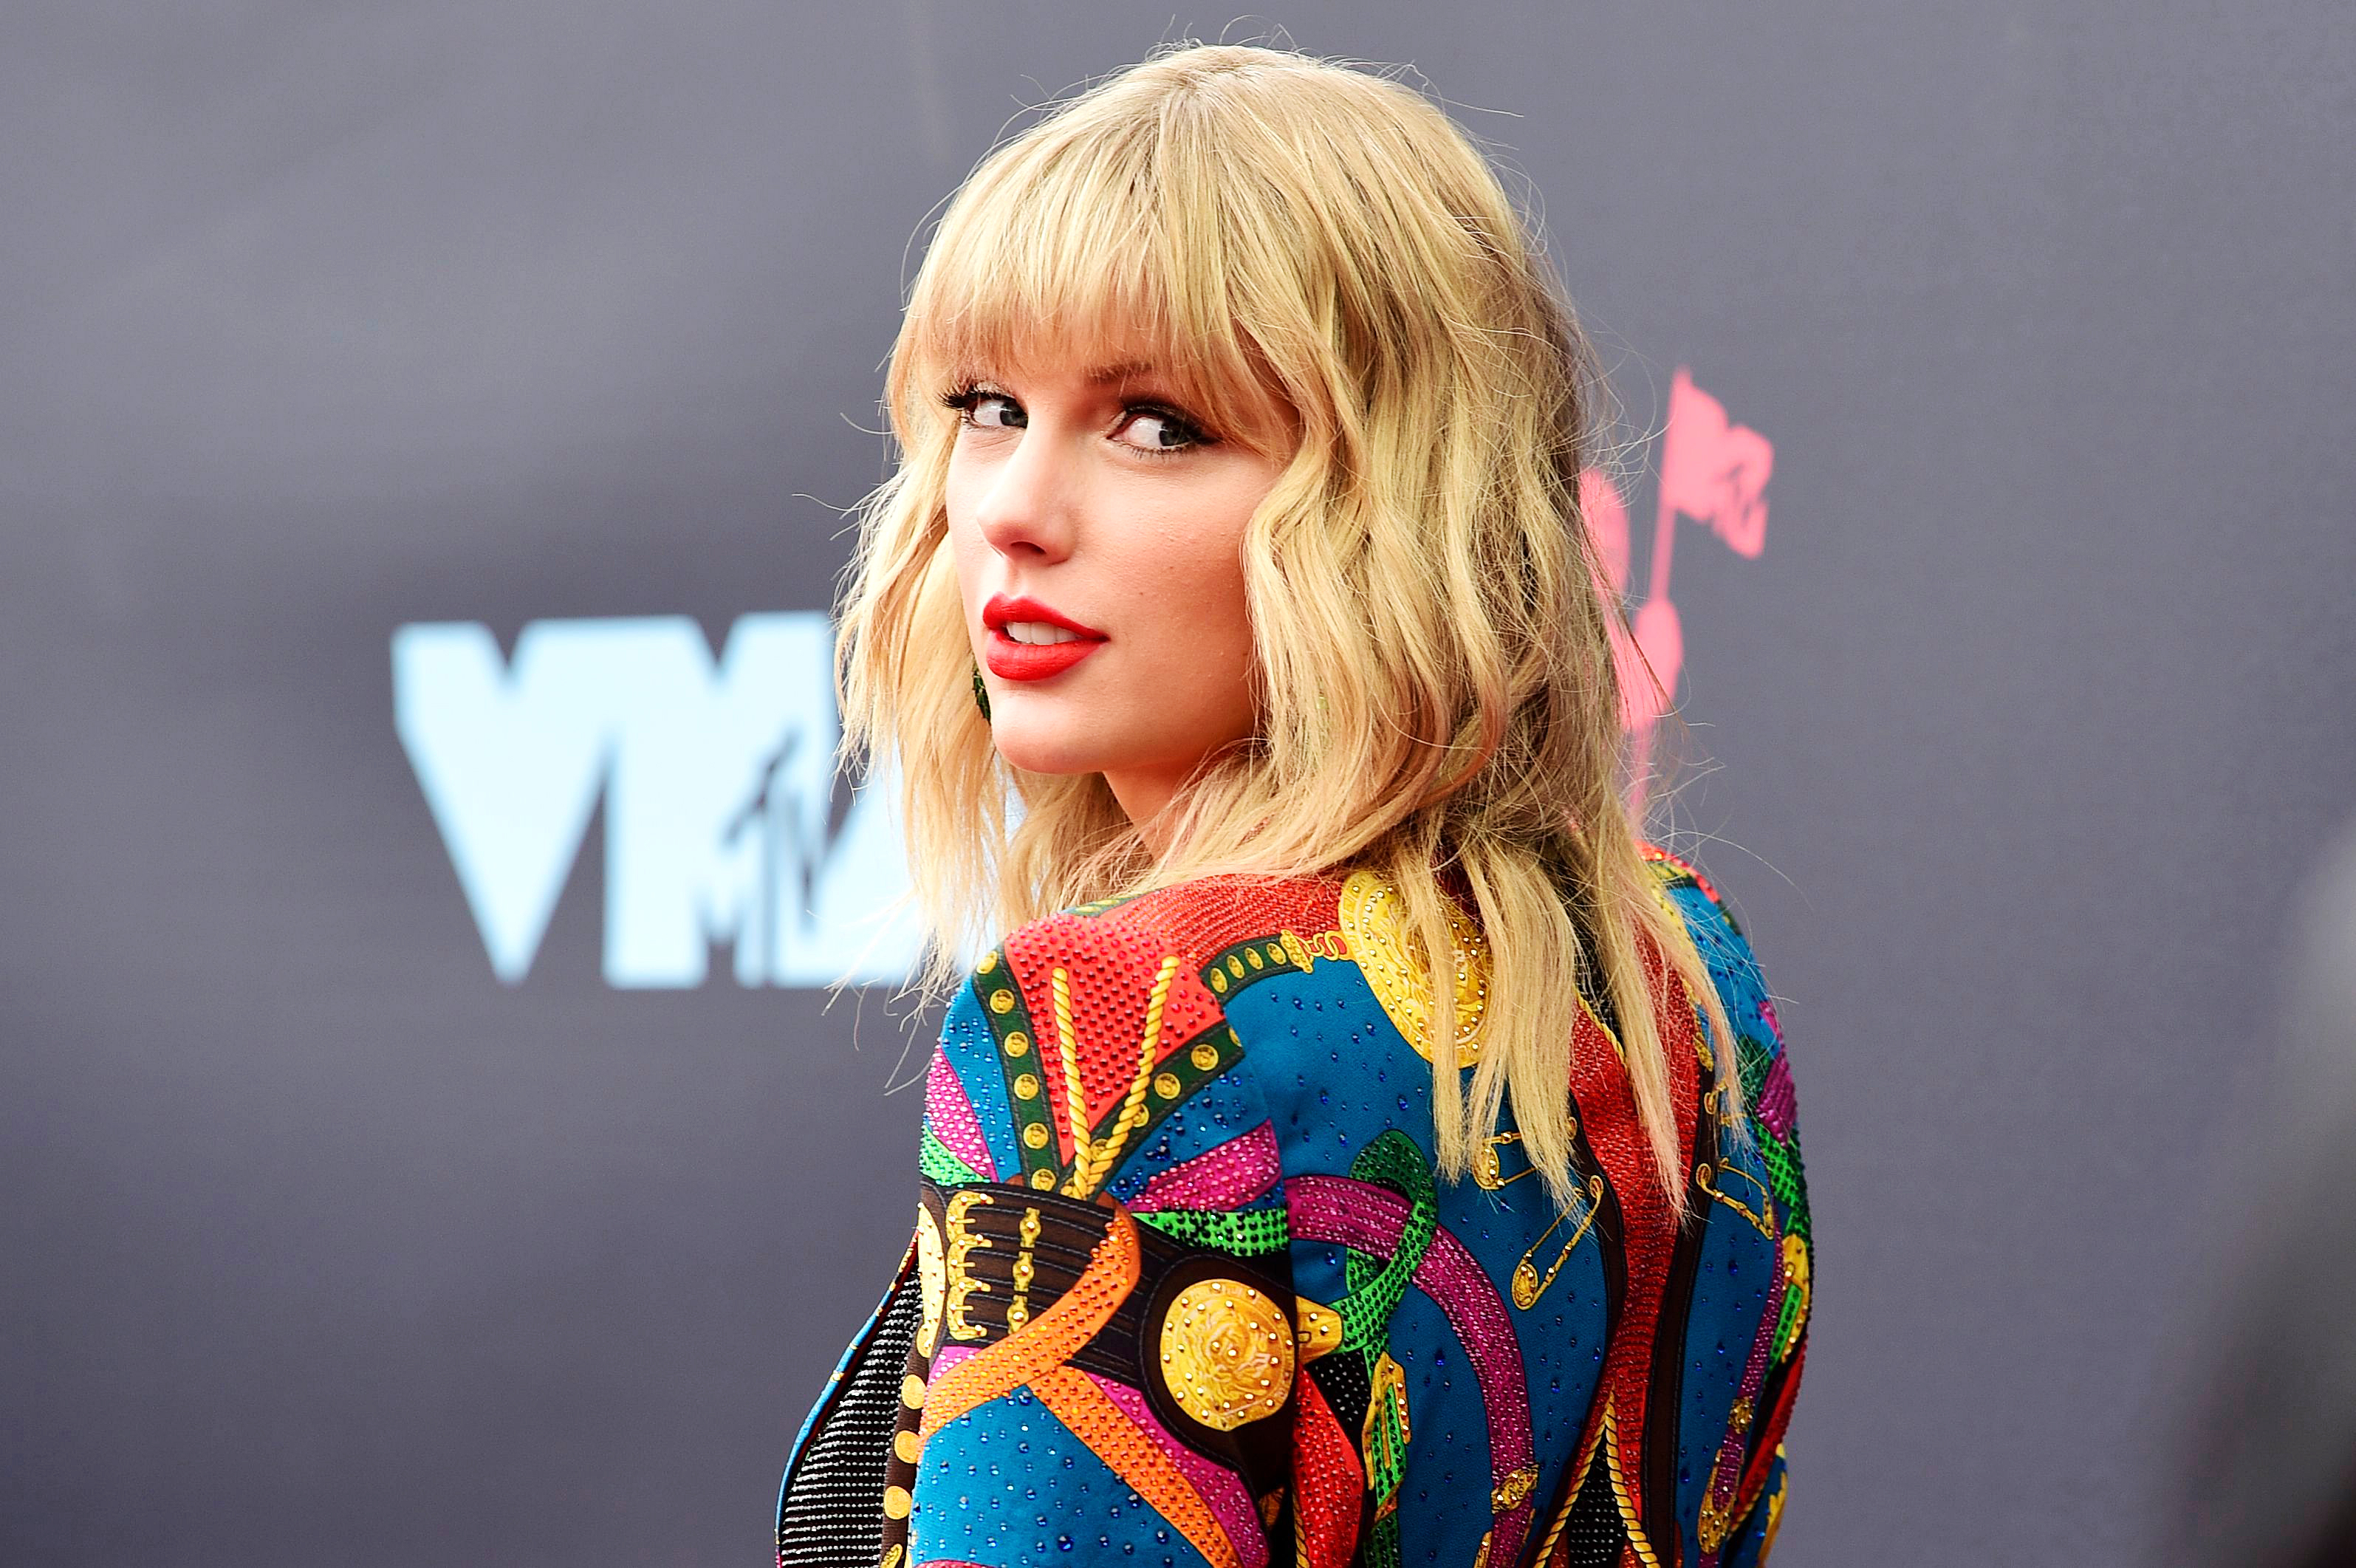 Lover: Taylor Swift's lyrics about colors